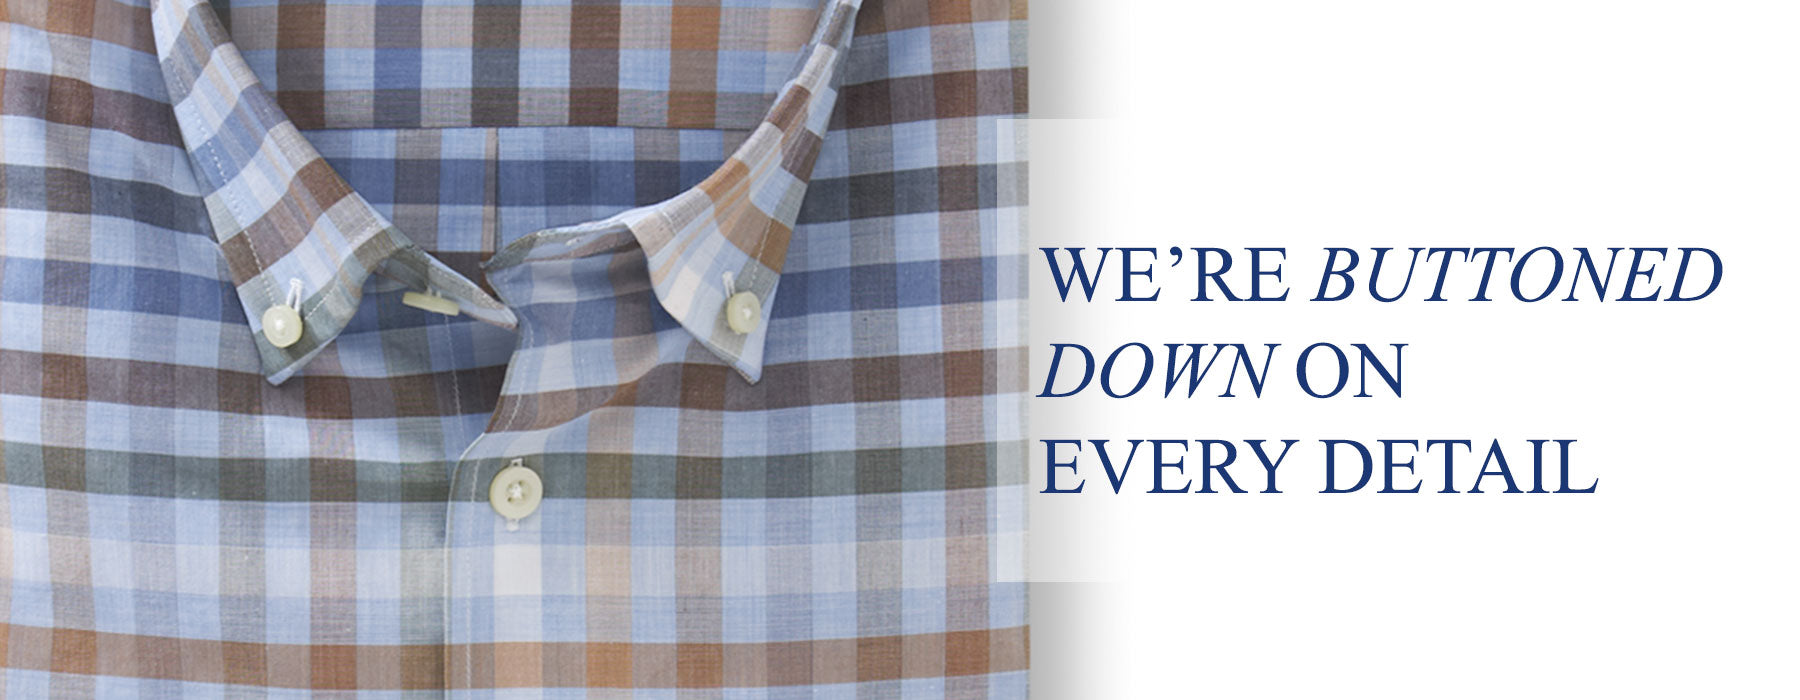 we're buttoned down on every detail woven shirt